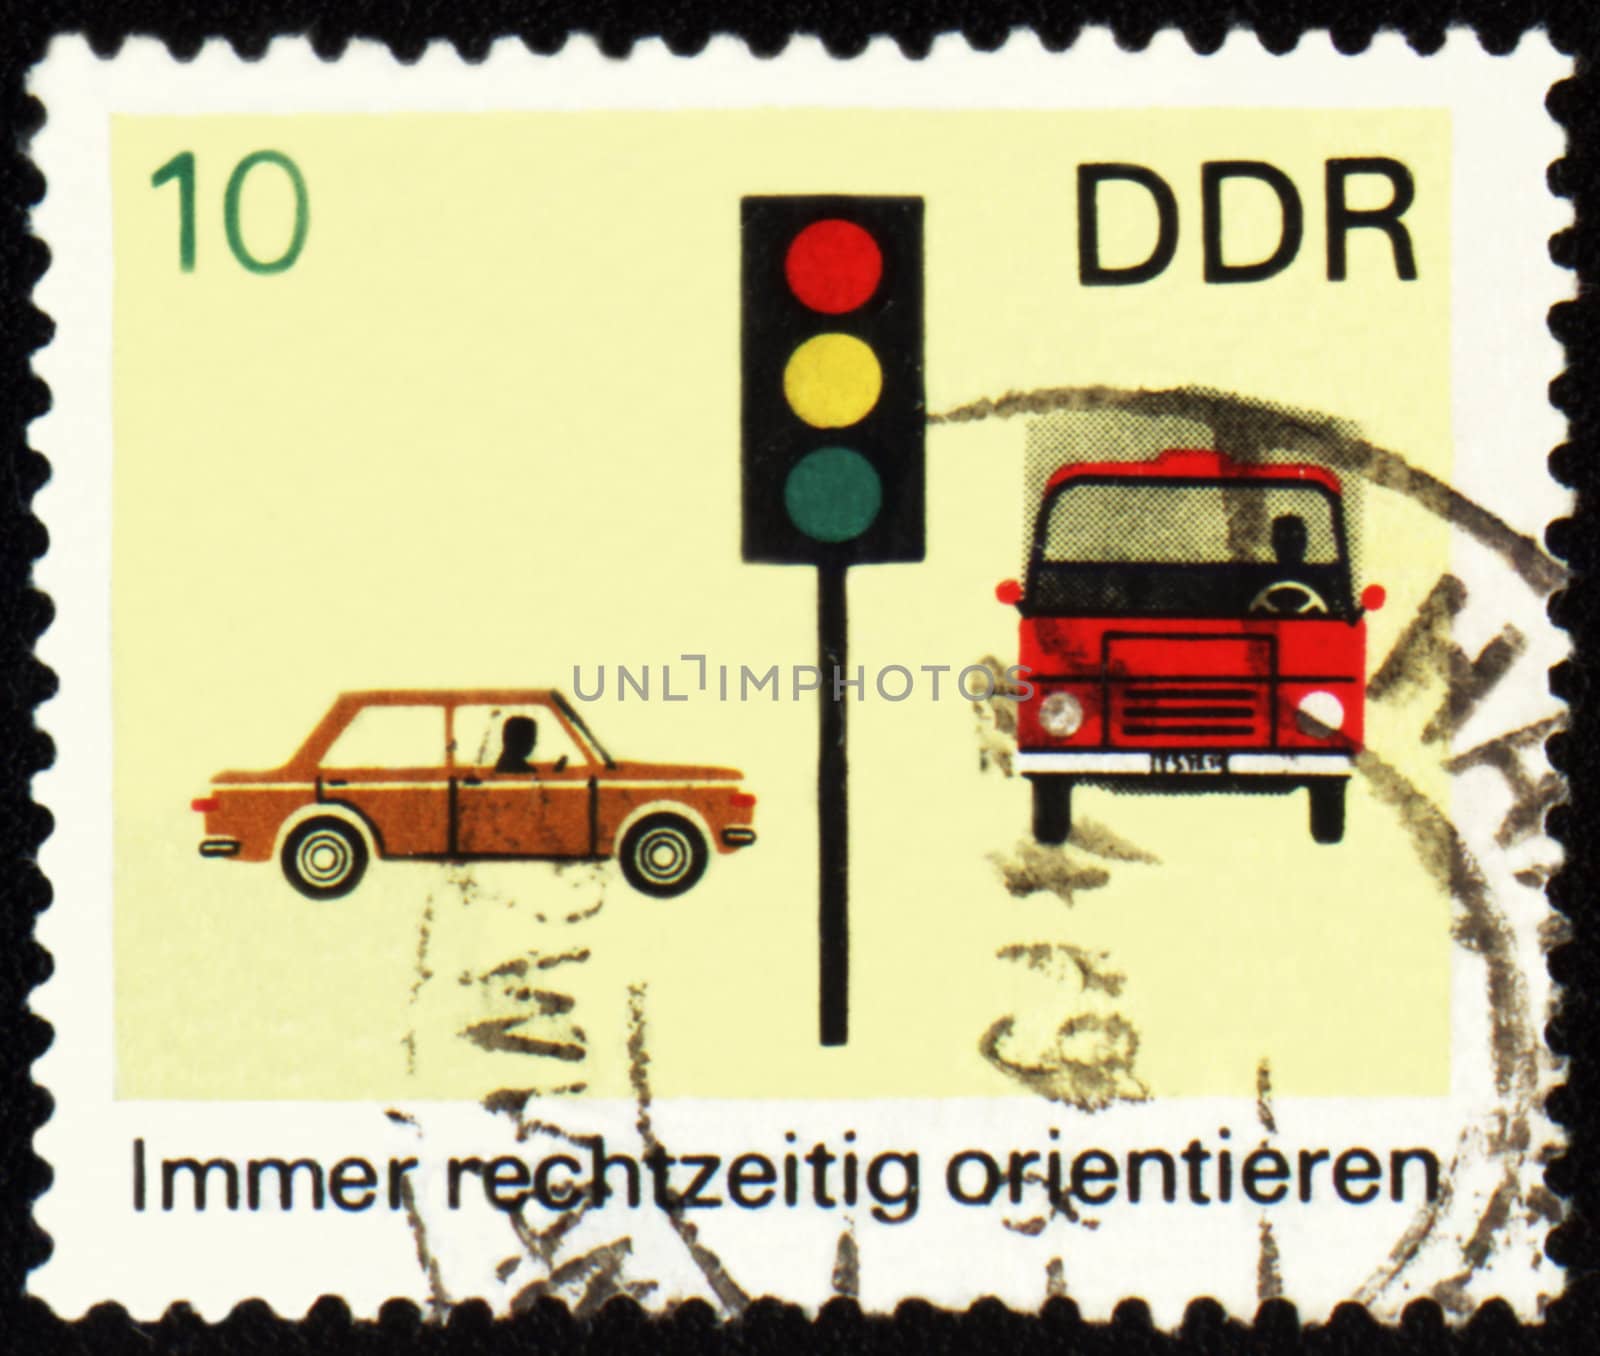 GDR - CIRCA 1960s: a stamp printed in GDR (East Germany) shows car, truck and light signal, devoted to the explaining rules of the road, circa 1960s